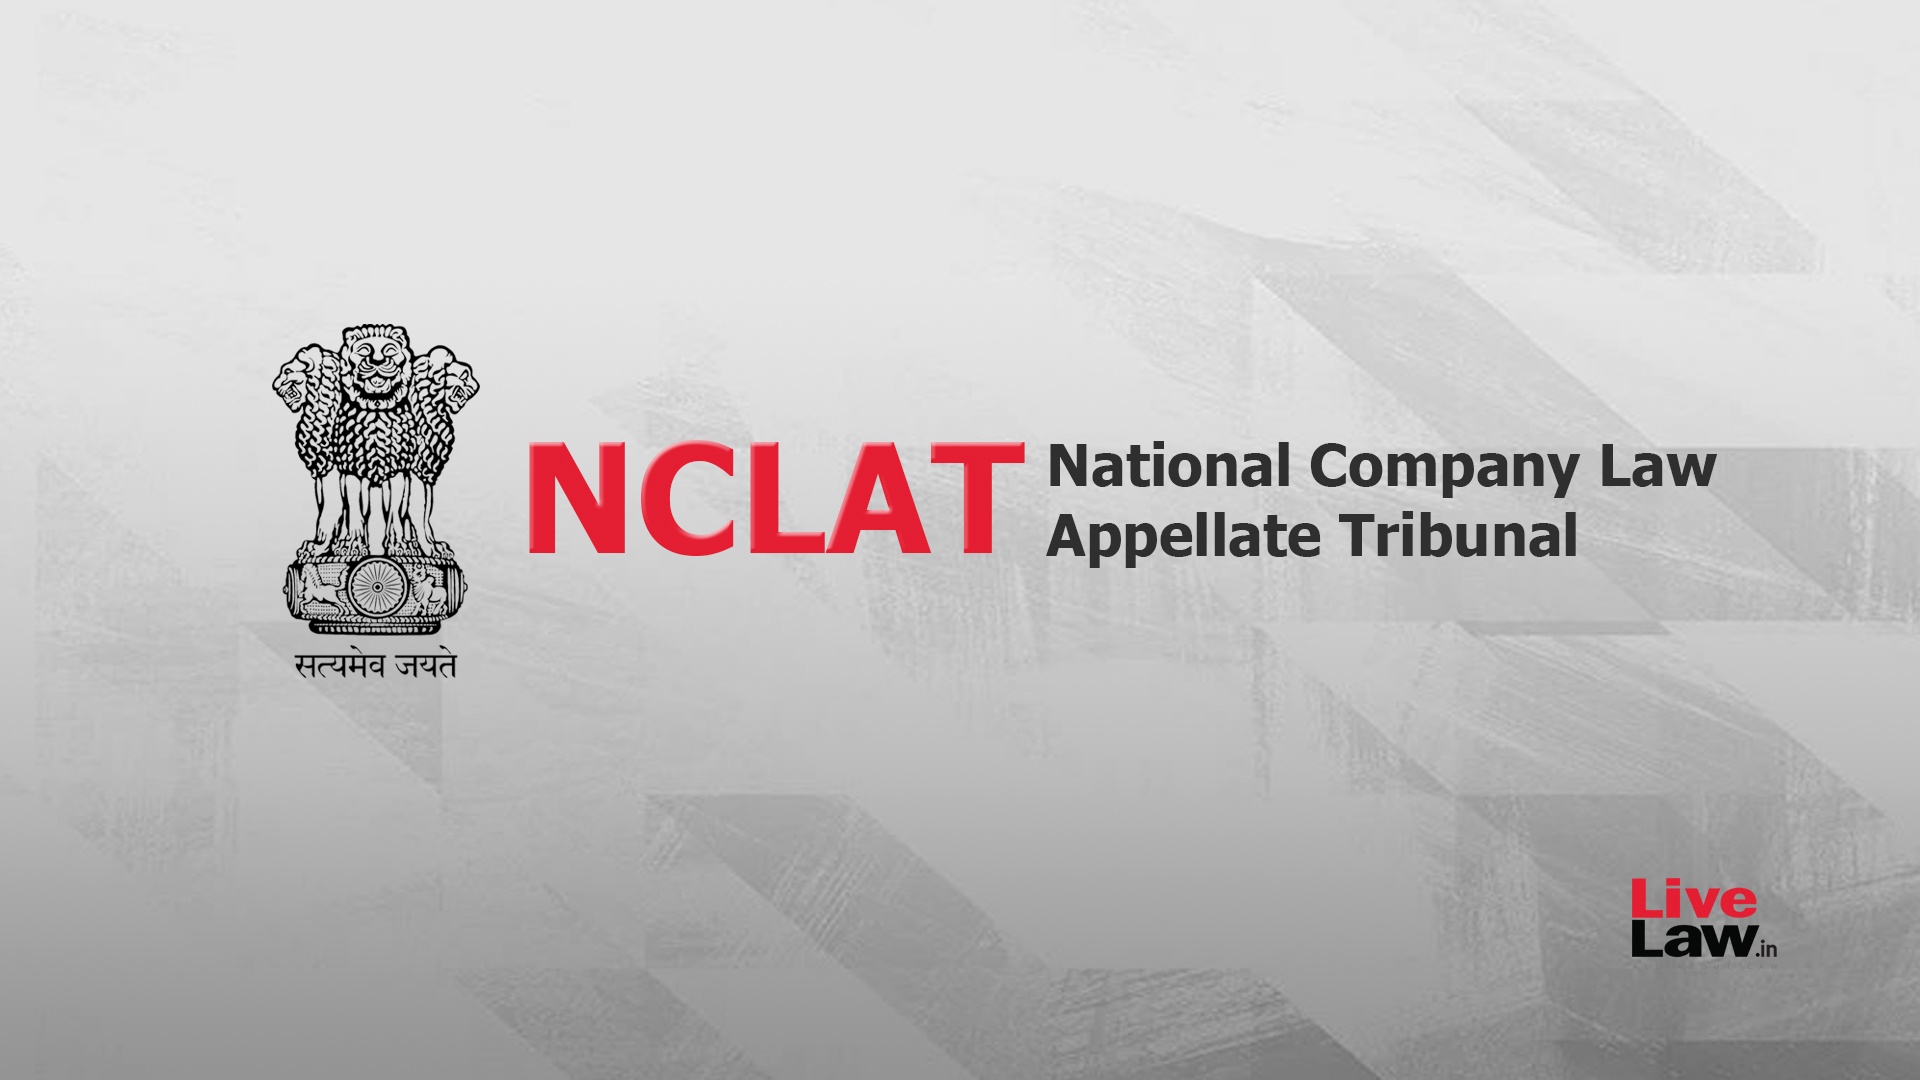 Bankers Certificate Not Mandatorily Required To Trigger CIRP Under Section 9 Of IBC: NCLAT Delhi